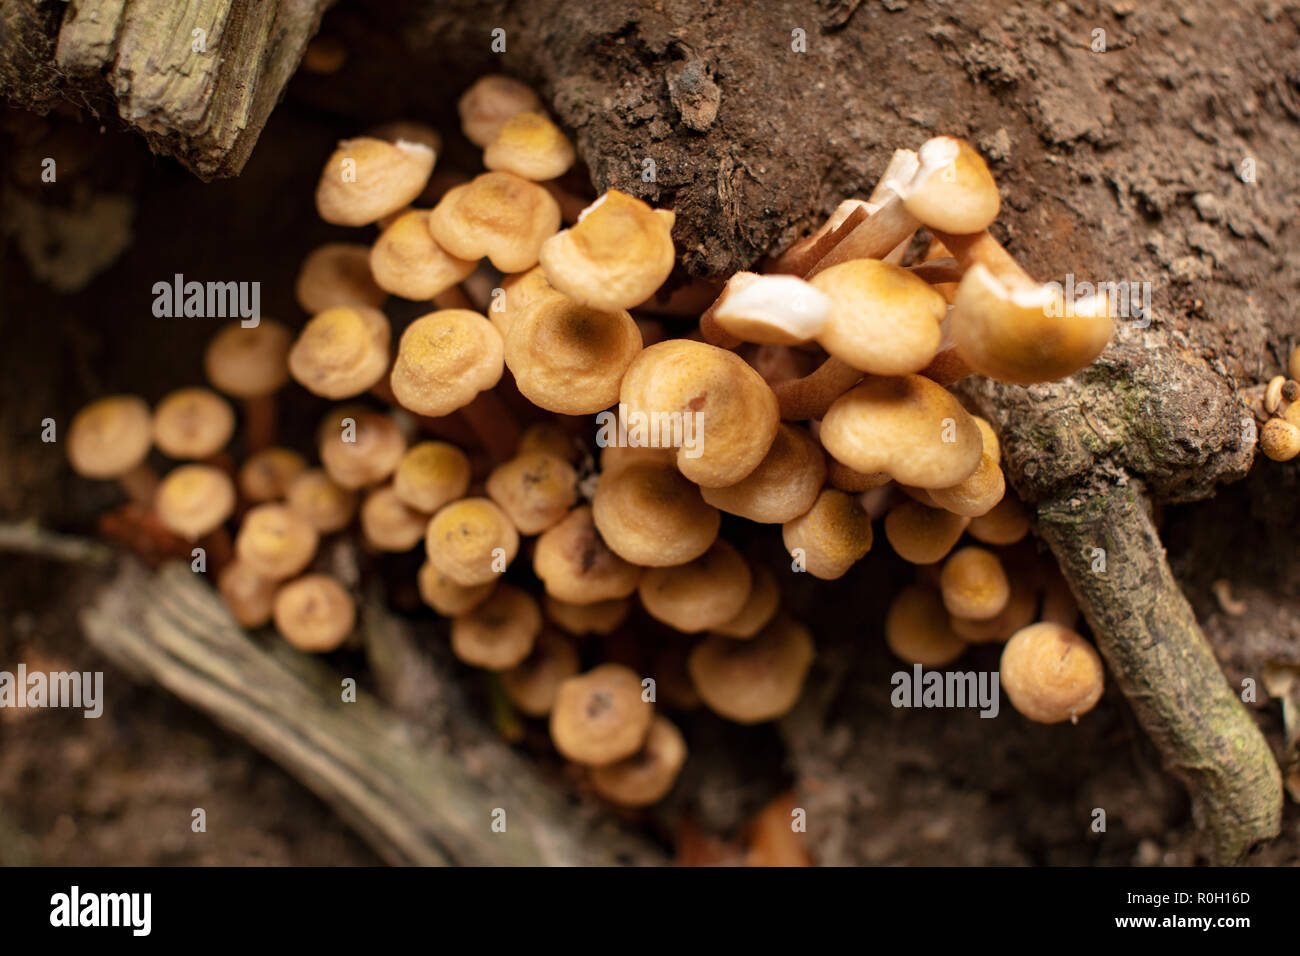 Mushrooms in a forest, Pilze im Wald Stock Photo